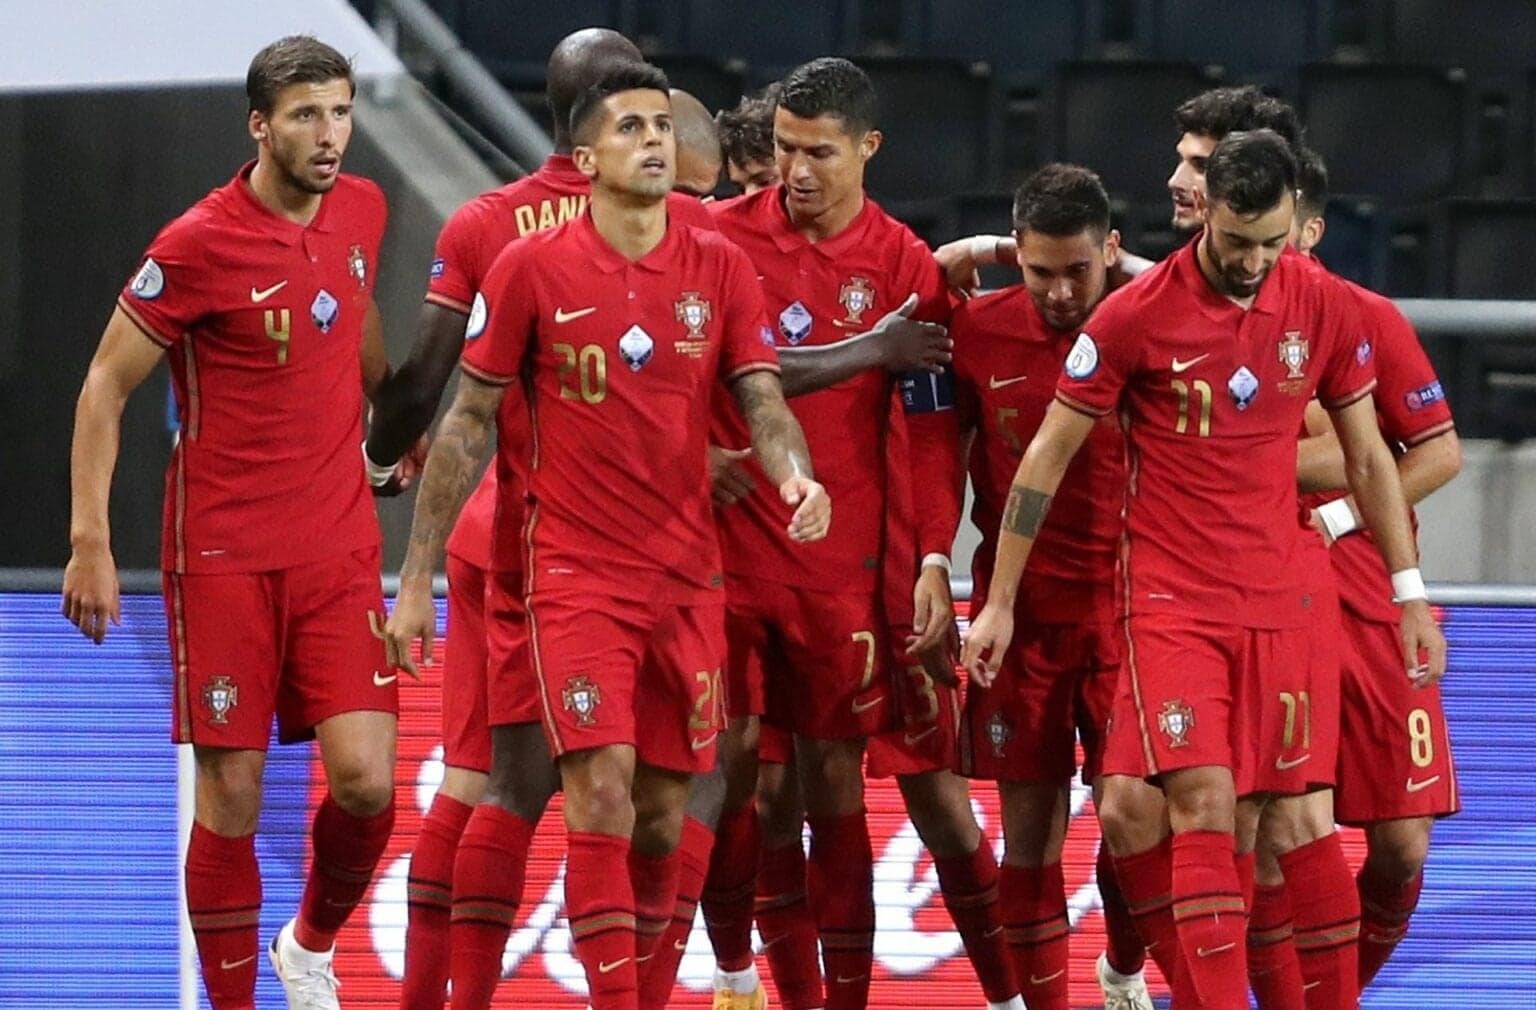 'We Must Be Proud!' - Cristiano Ronaldo Says After Portugal's Defeat To France